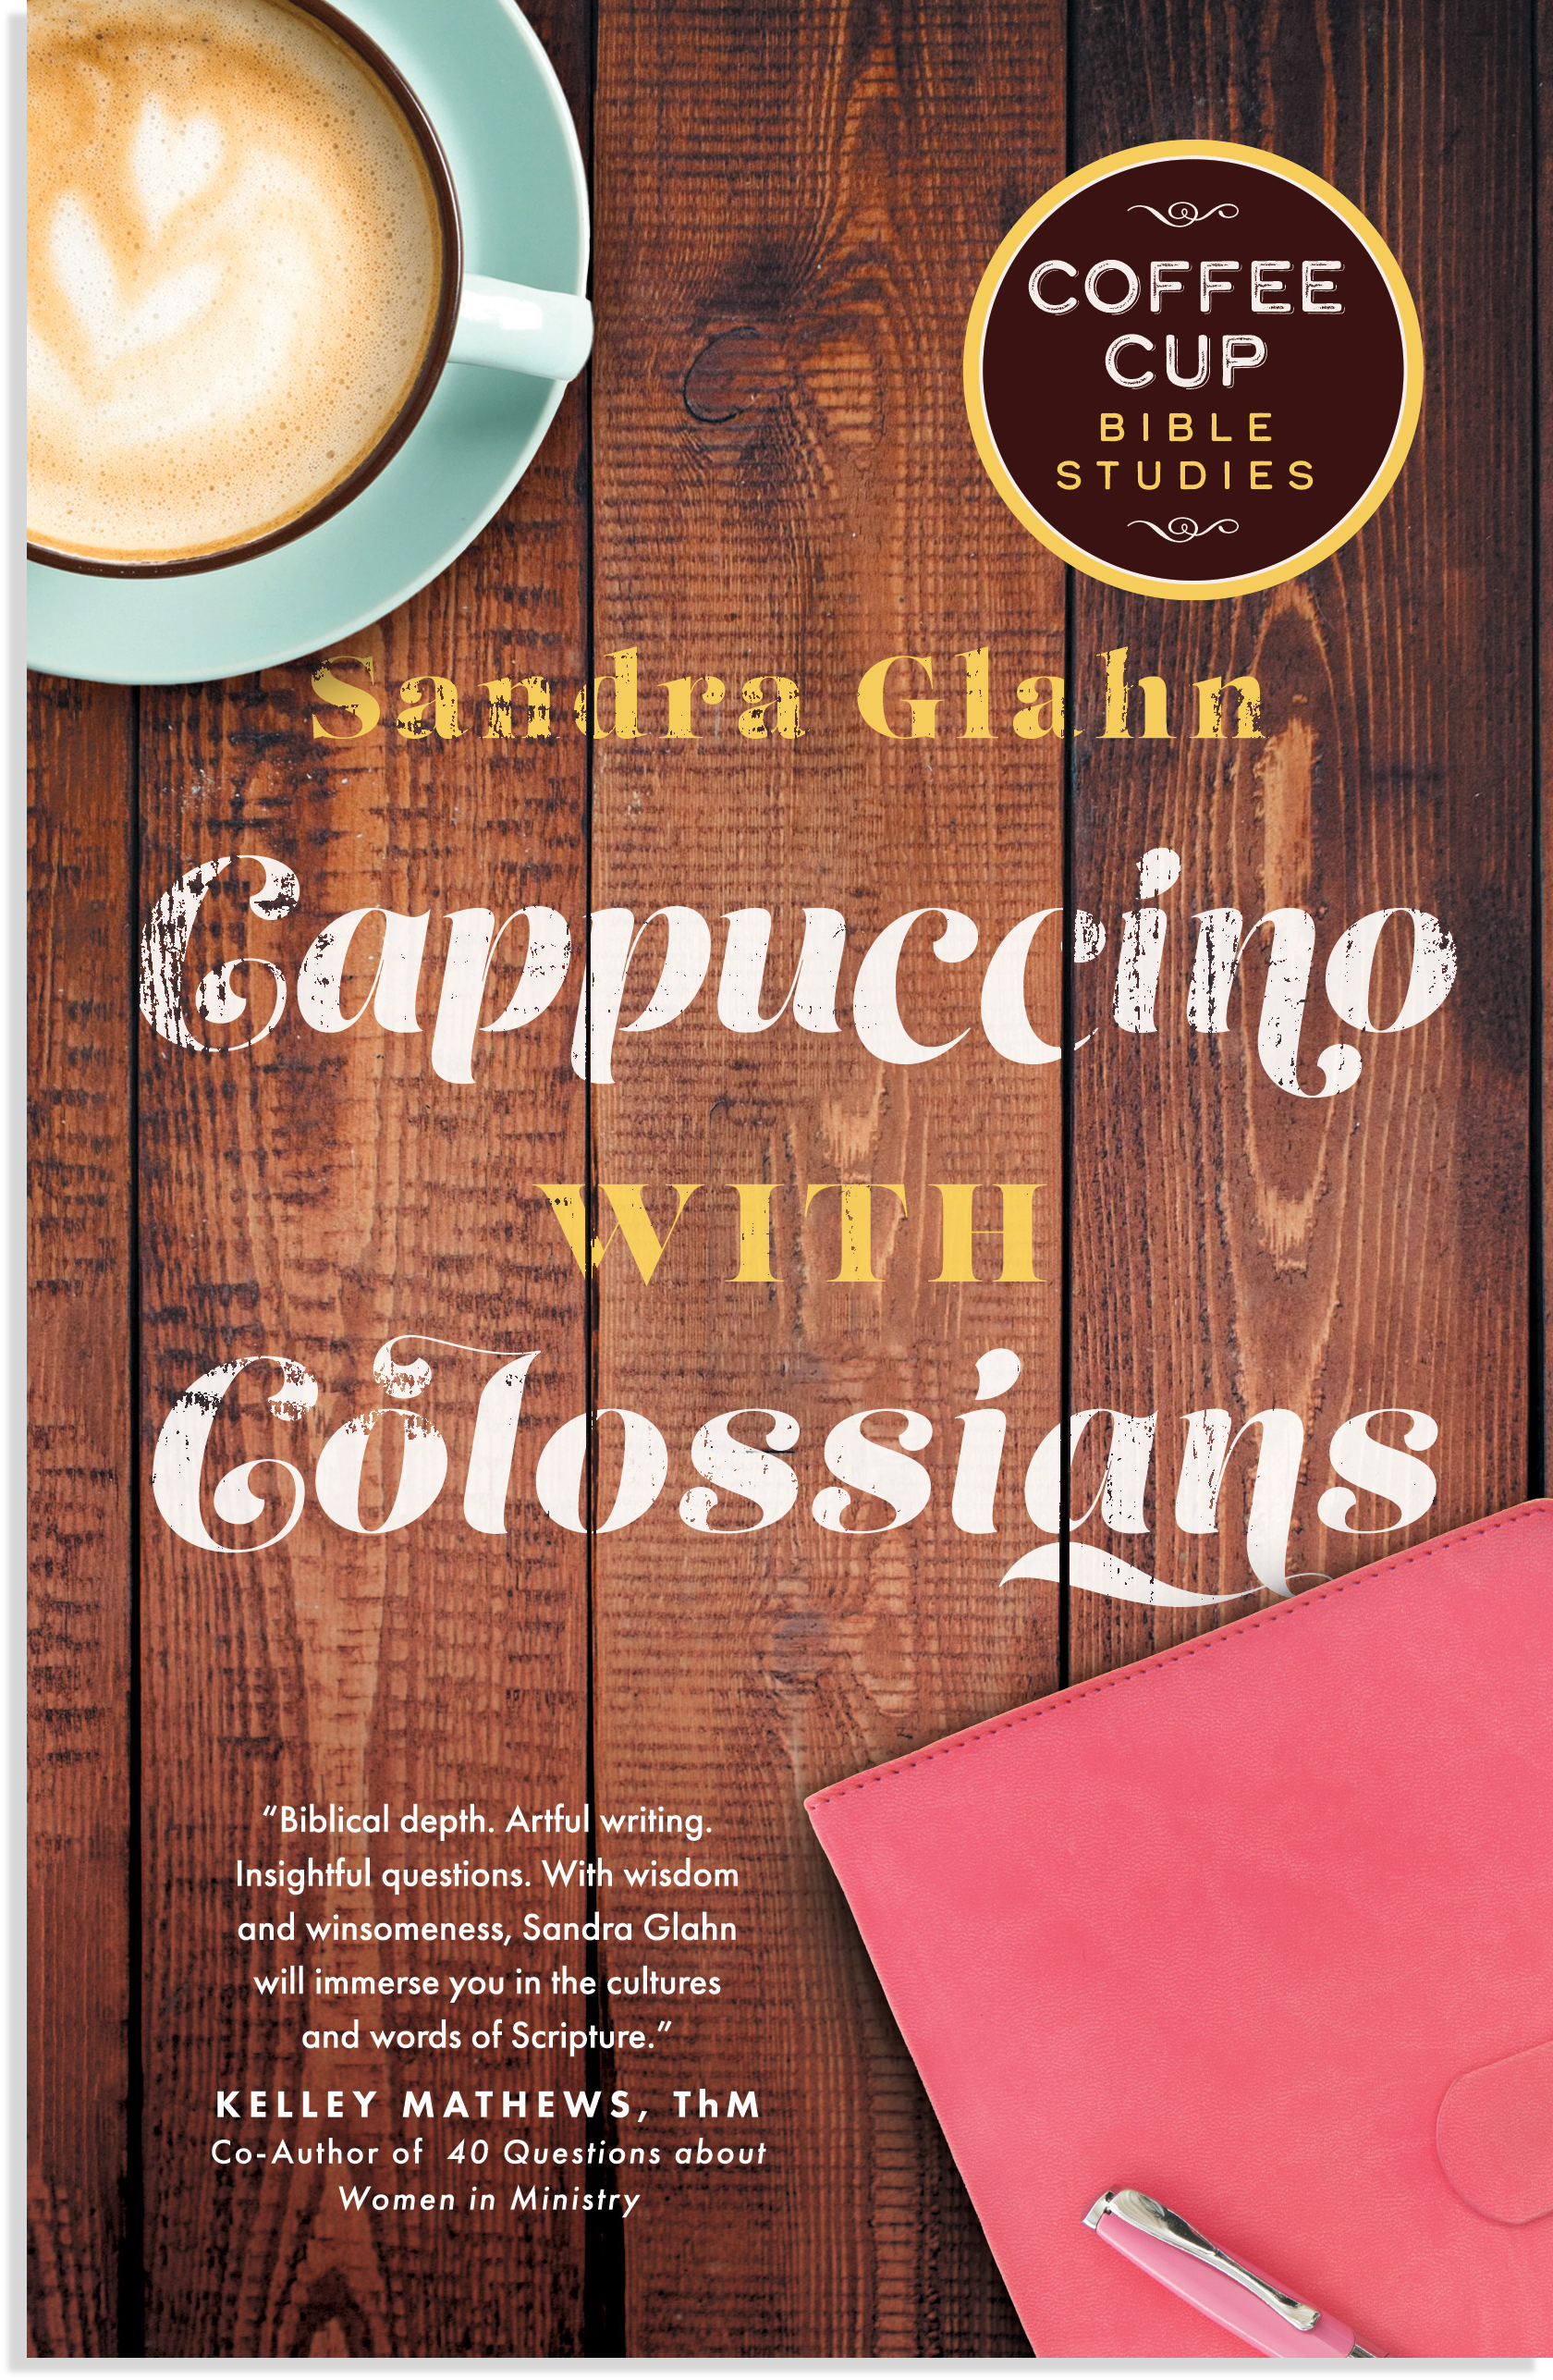 Sandra-Glahn-Cappuccino-with-Colossians-Coffee-Cup-Bible-Studies.png